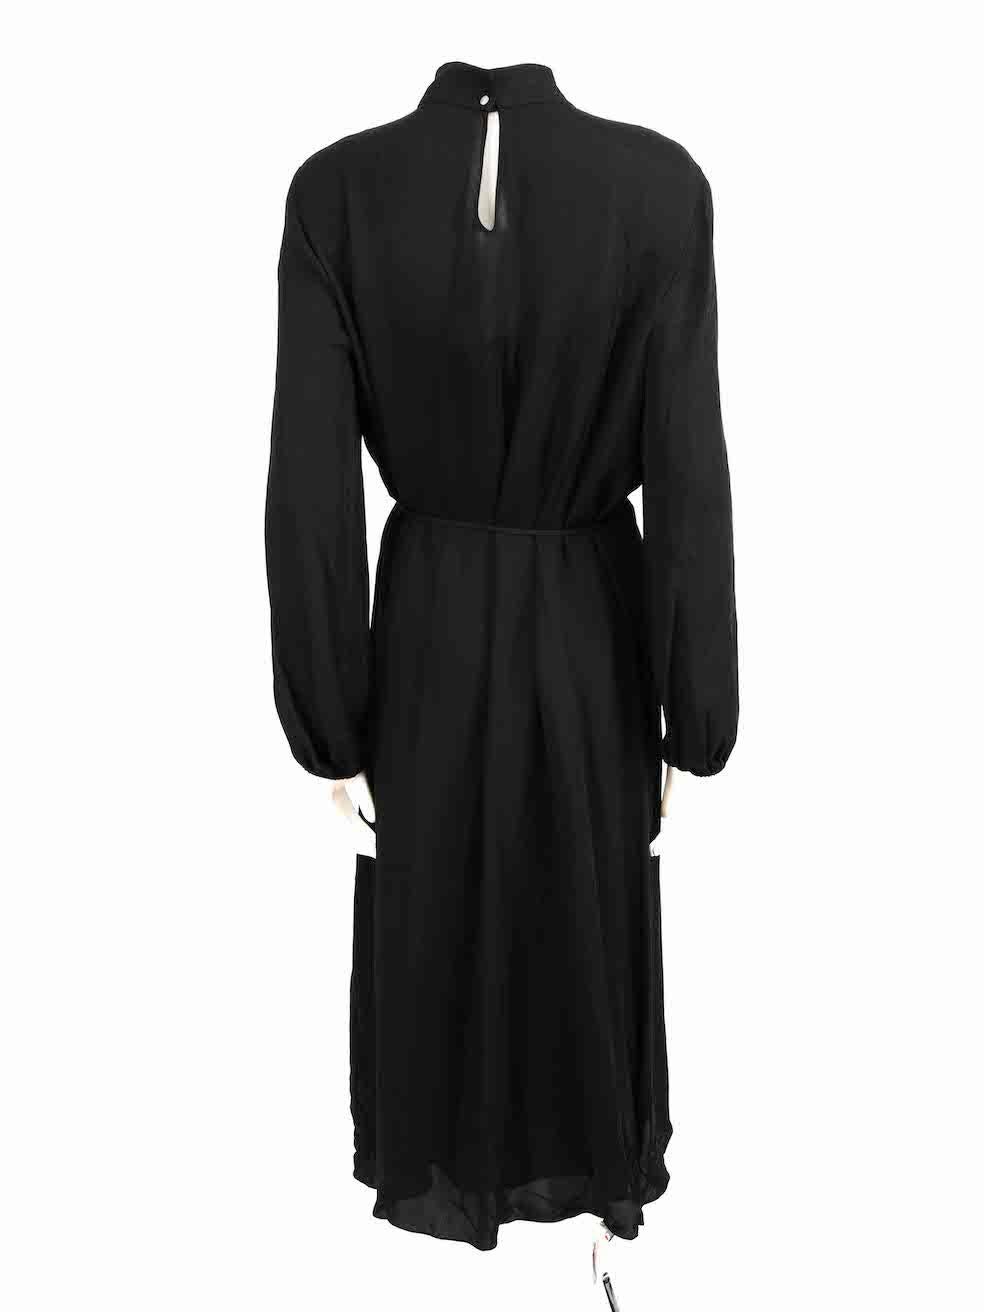 Theory Black Silk High Neck Midi Dress Size XXL In Good Condition For Sale In London, GB